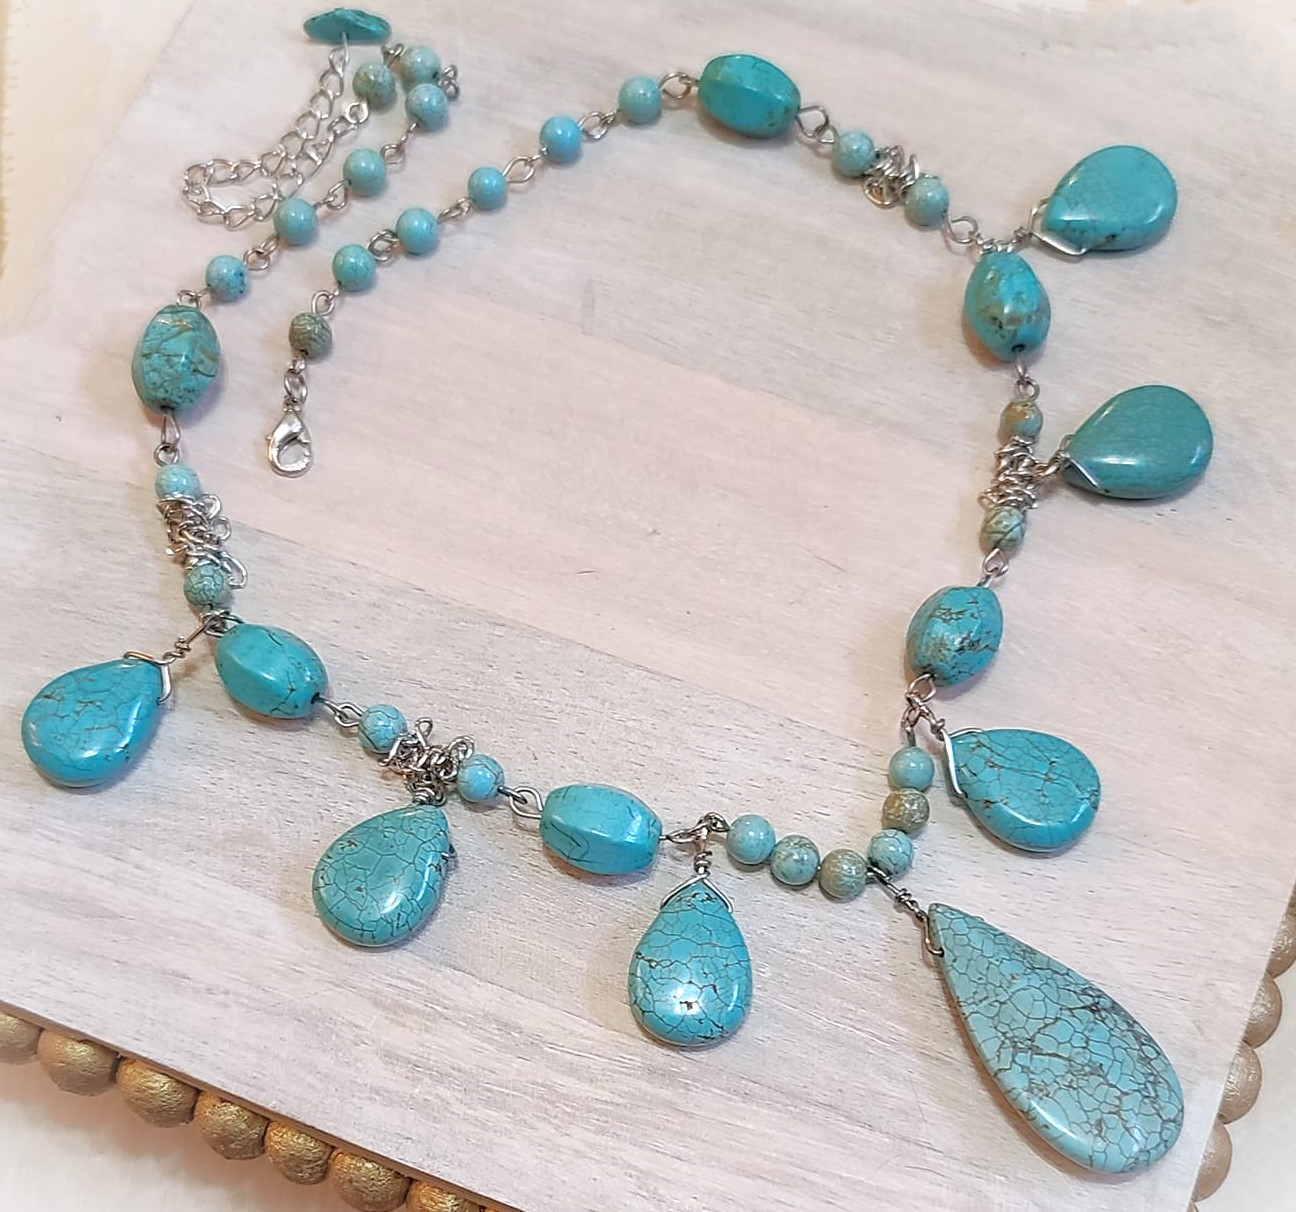 Turquoise howlite gemstone tear drop necklace